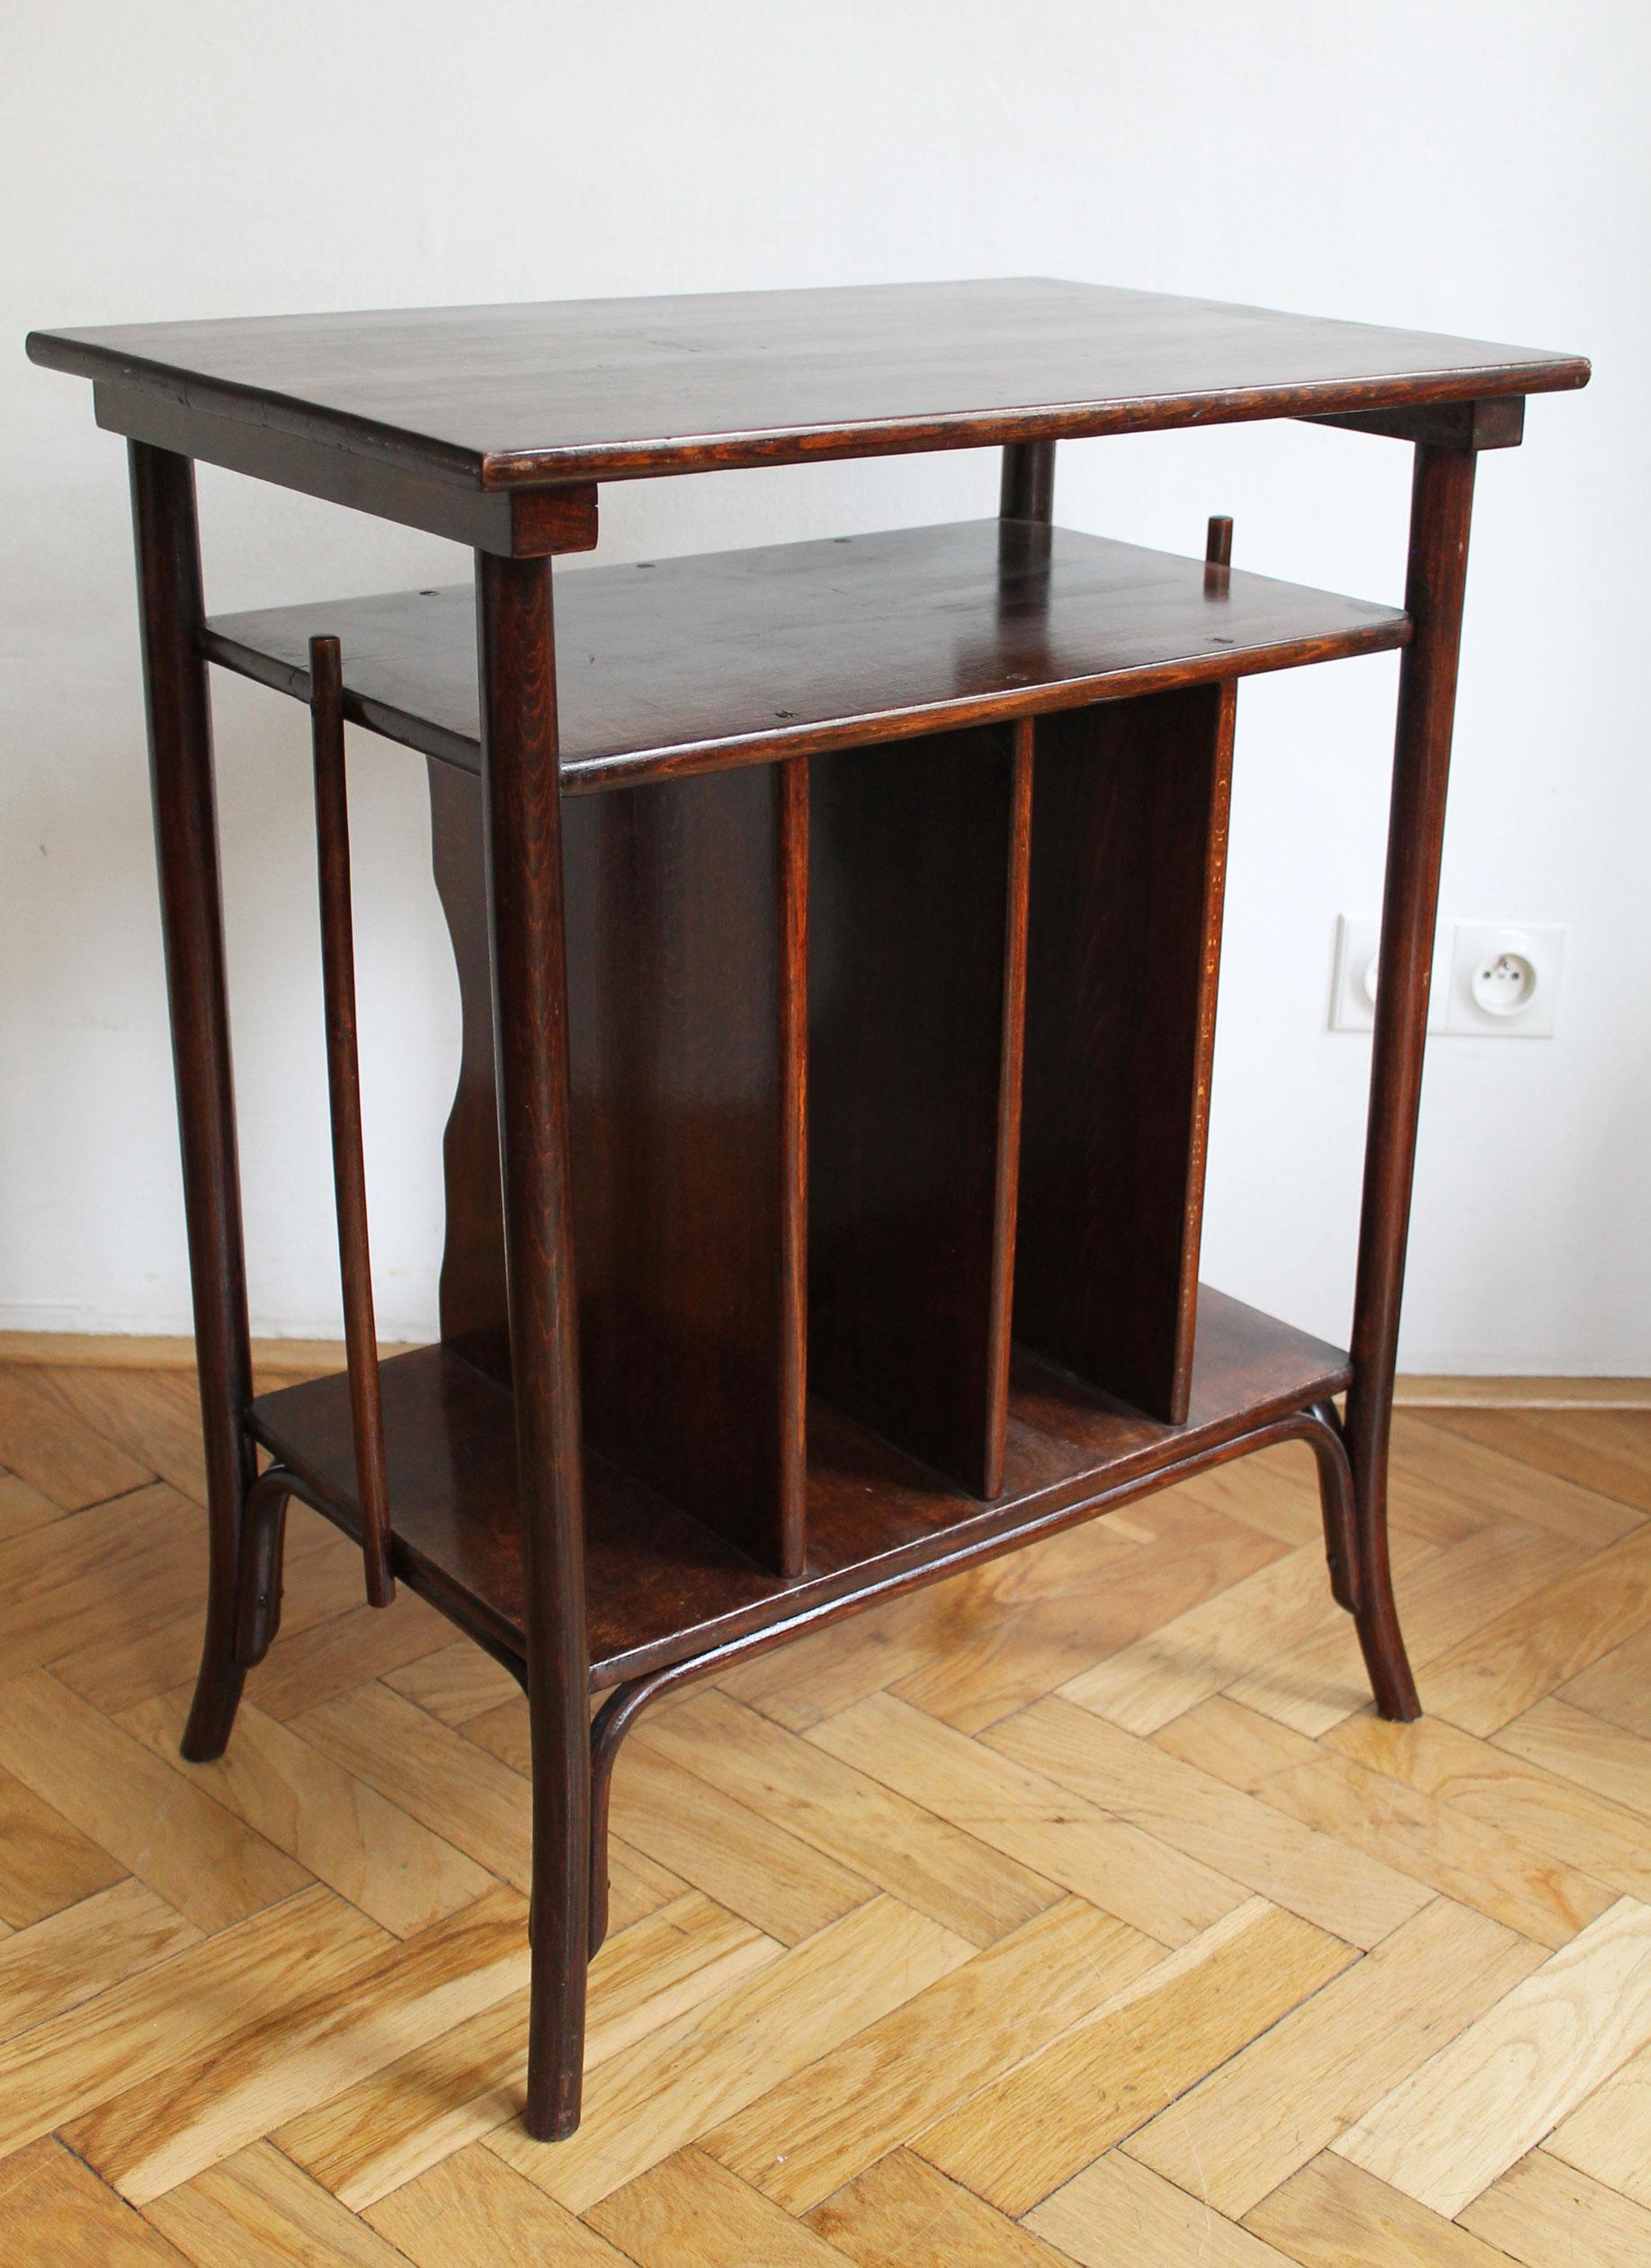 Hand-Crafted 1910's Art Nouveau Table by Gebrüder Thonet For Sale